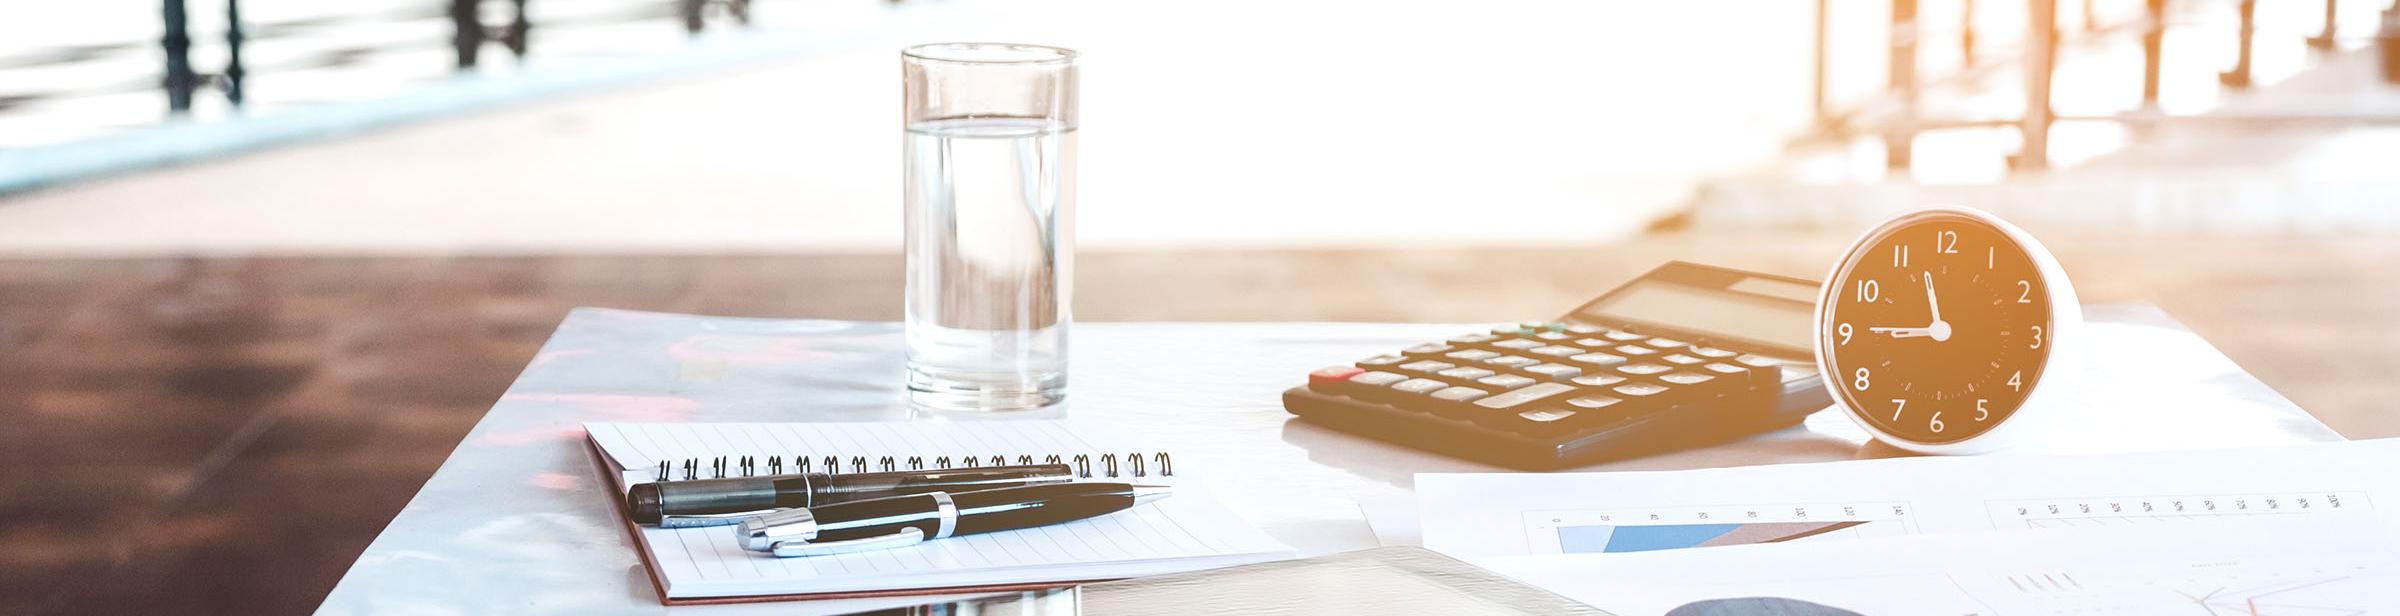 glass of water, clock, calculator, day planner and writing pen on a desk